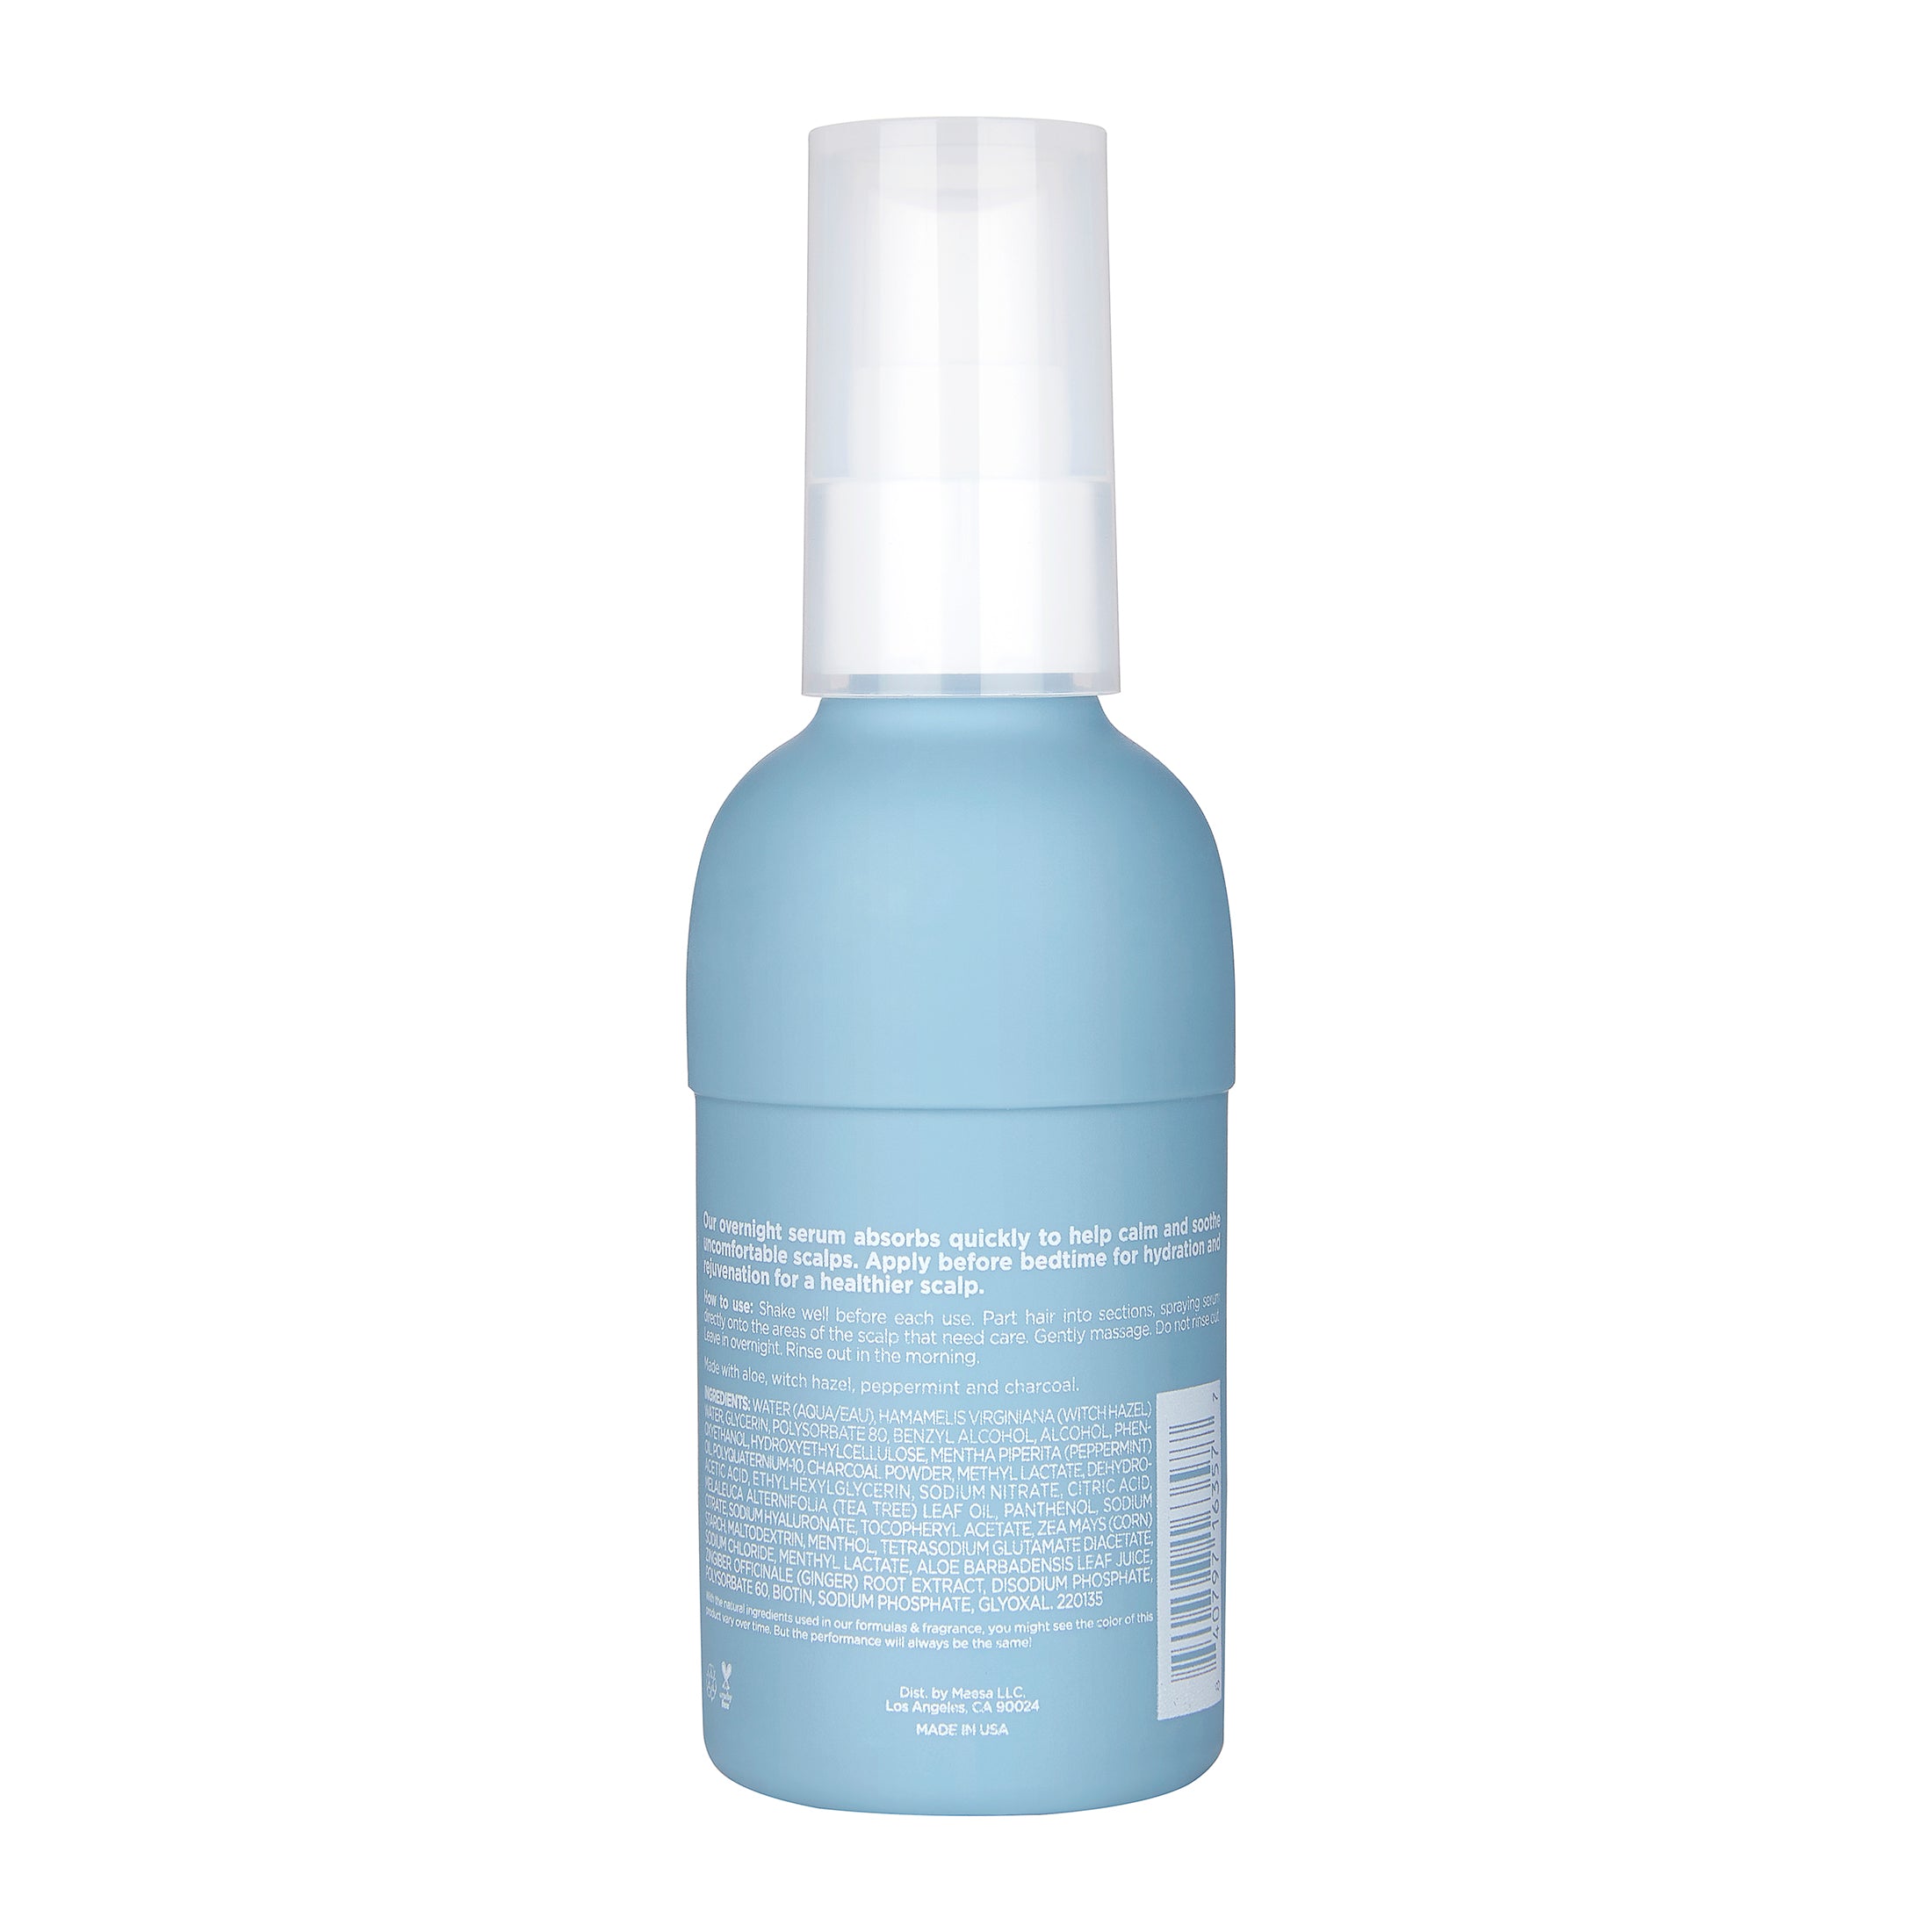 Don’t Wait Up Overnight Scalp Relief Mist with Aloe Vera | Soothes Dry, Itchy Scalp  4 fl oz